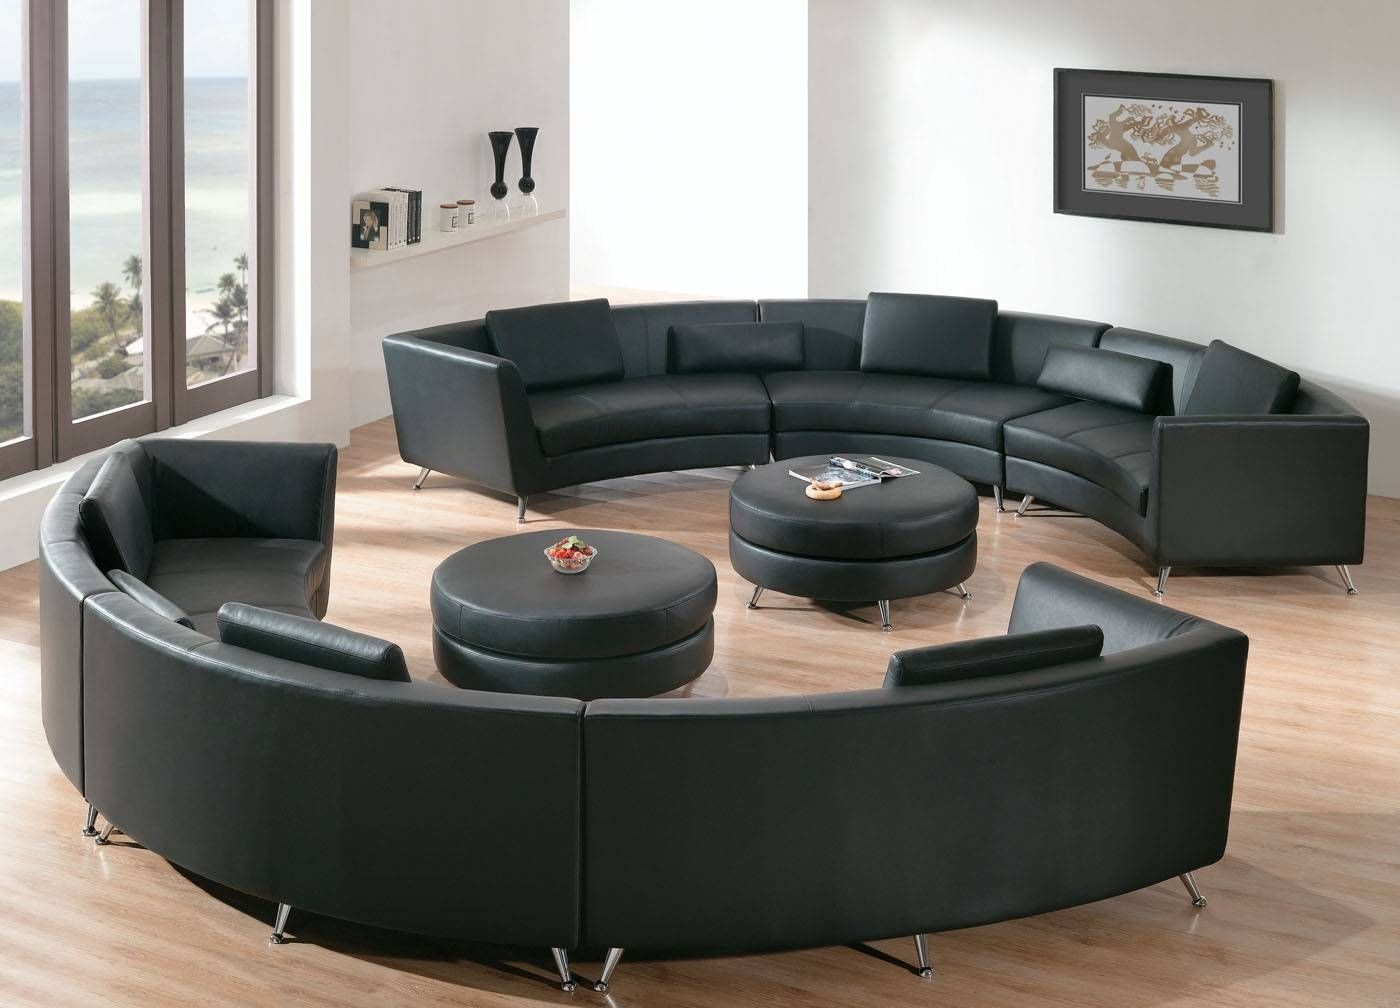 Sofas Center : Round Sofa Chair Ashley Furniture Large Big Trendy Intended For Big Round Sofa Chairs (View 23 of 30)